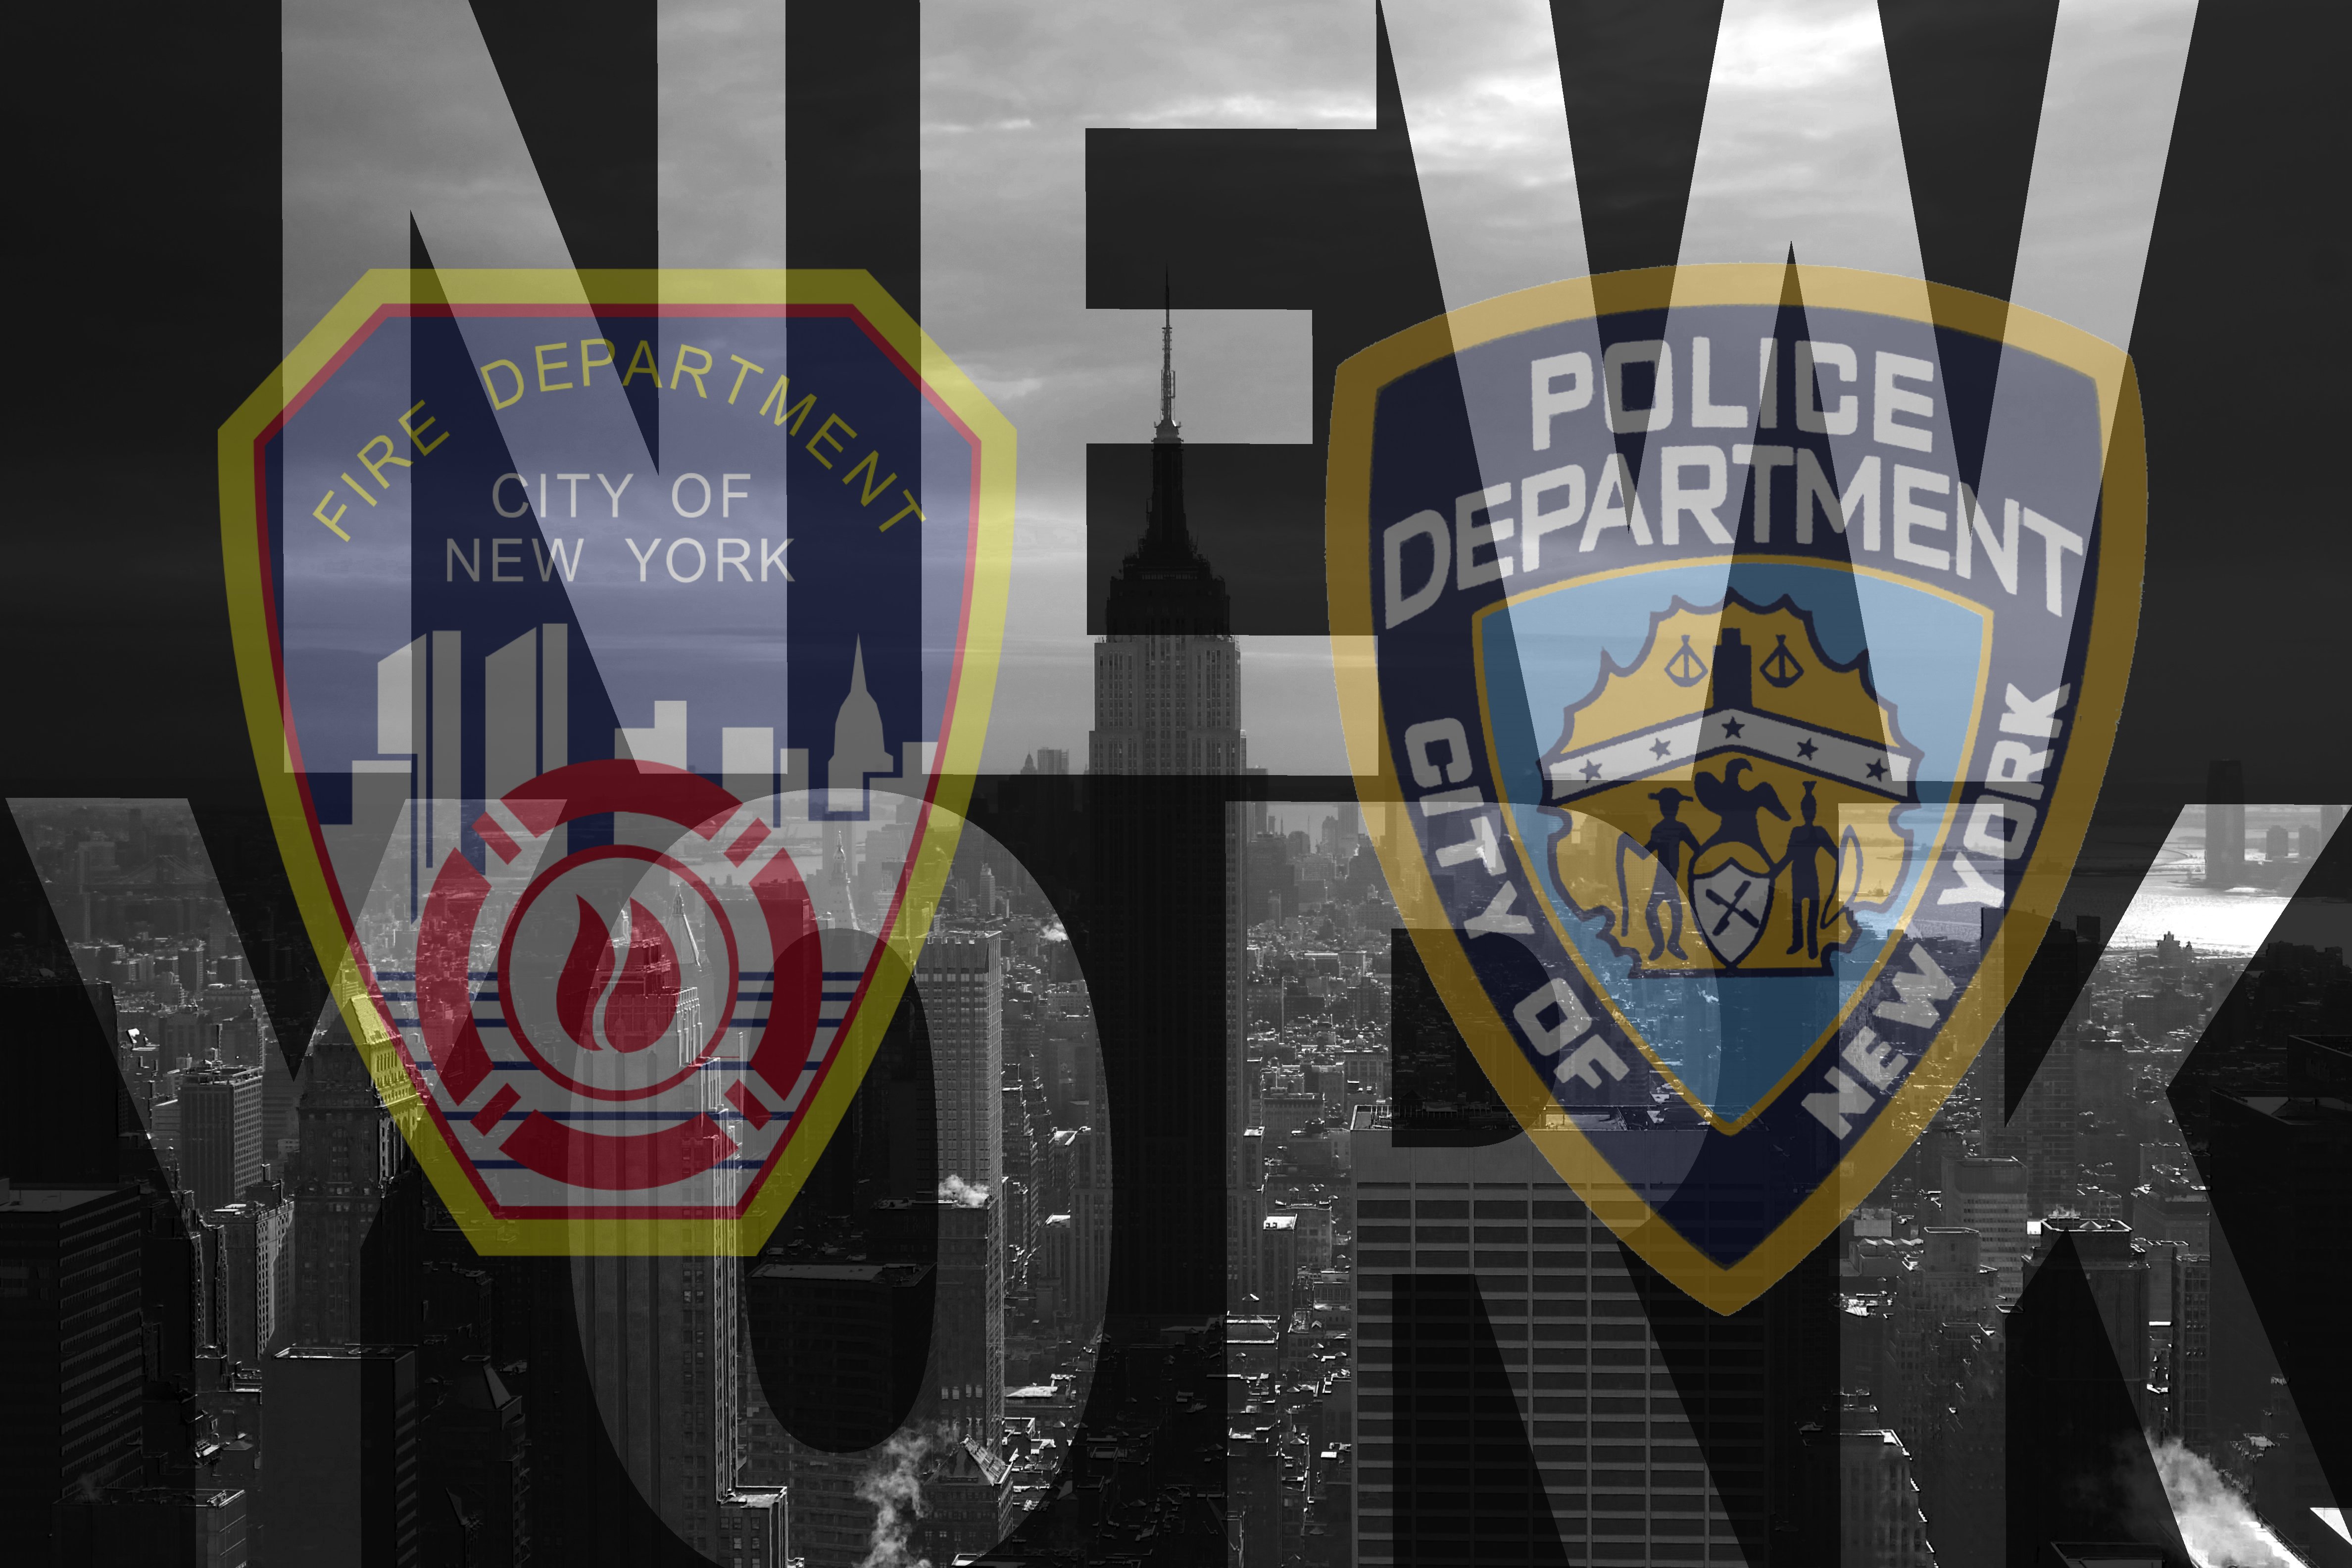 new, York, Nypd, Fdny Wallpapers HD / Desktop and Mobile Backgrounds